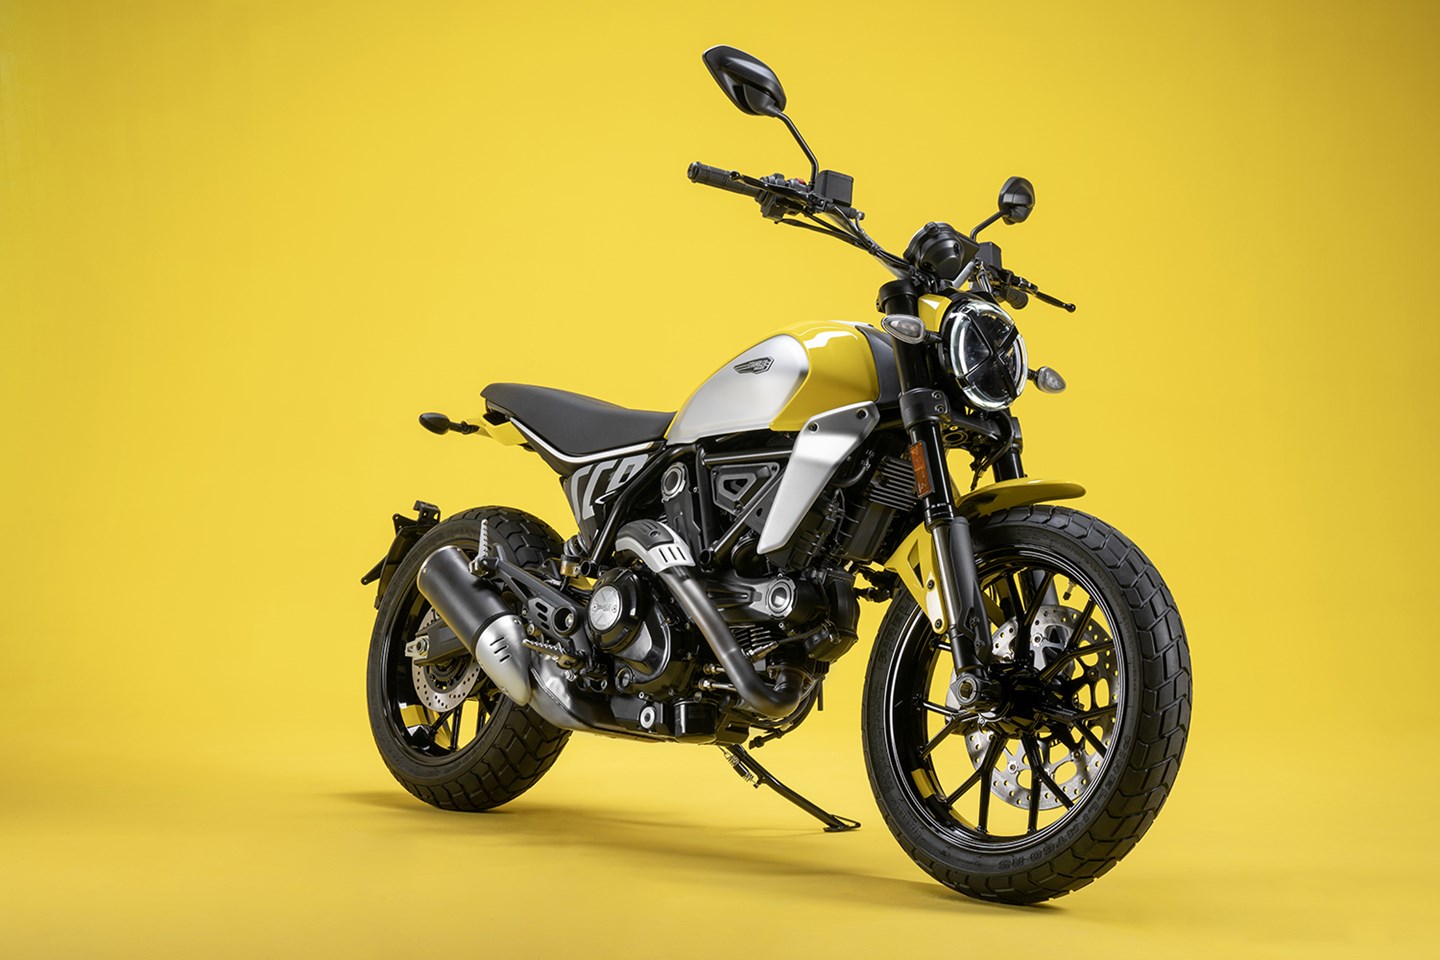 Lowering the height of the Ducati Scrambler 800. Is it possible?